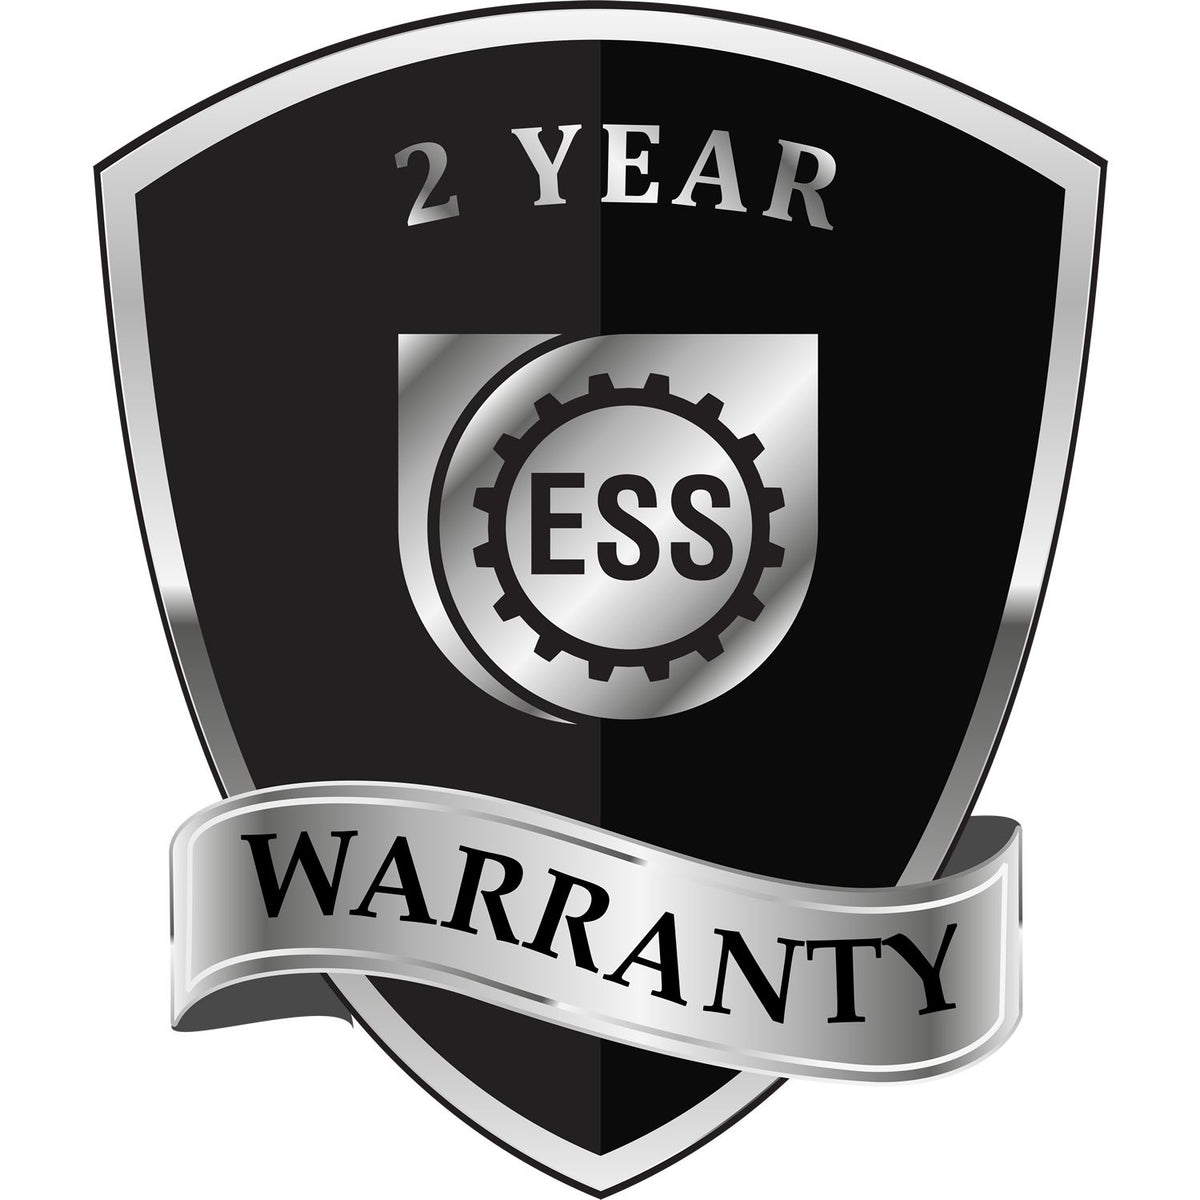 A badge or emblem showing a warranty icon for the State of West Virginia Extended Long Reach Engineer Seal